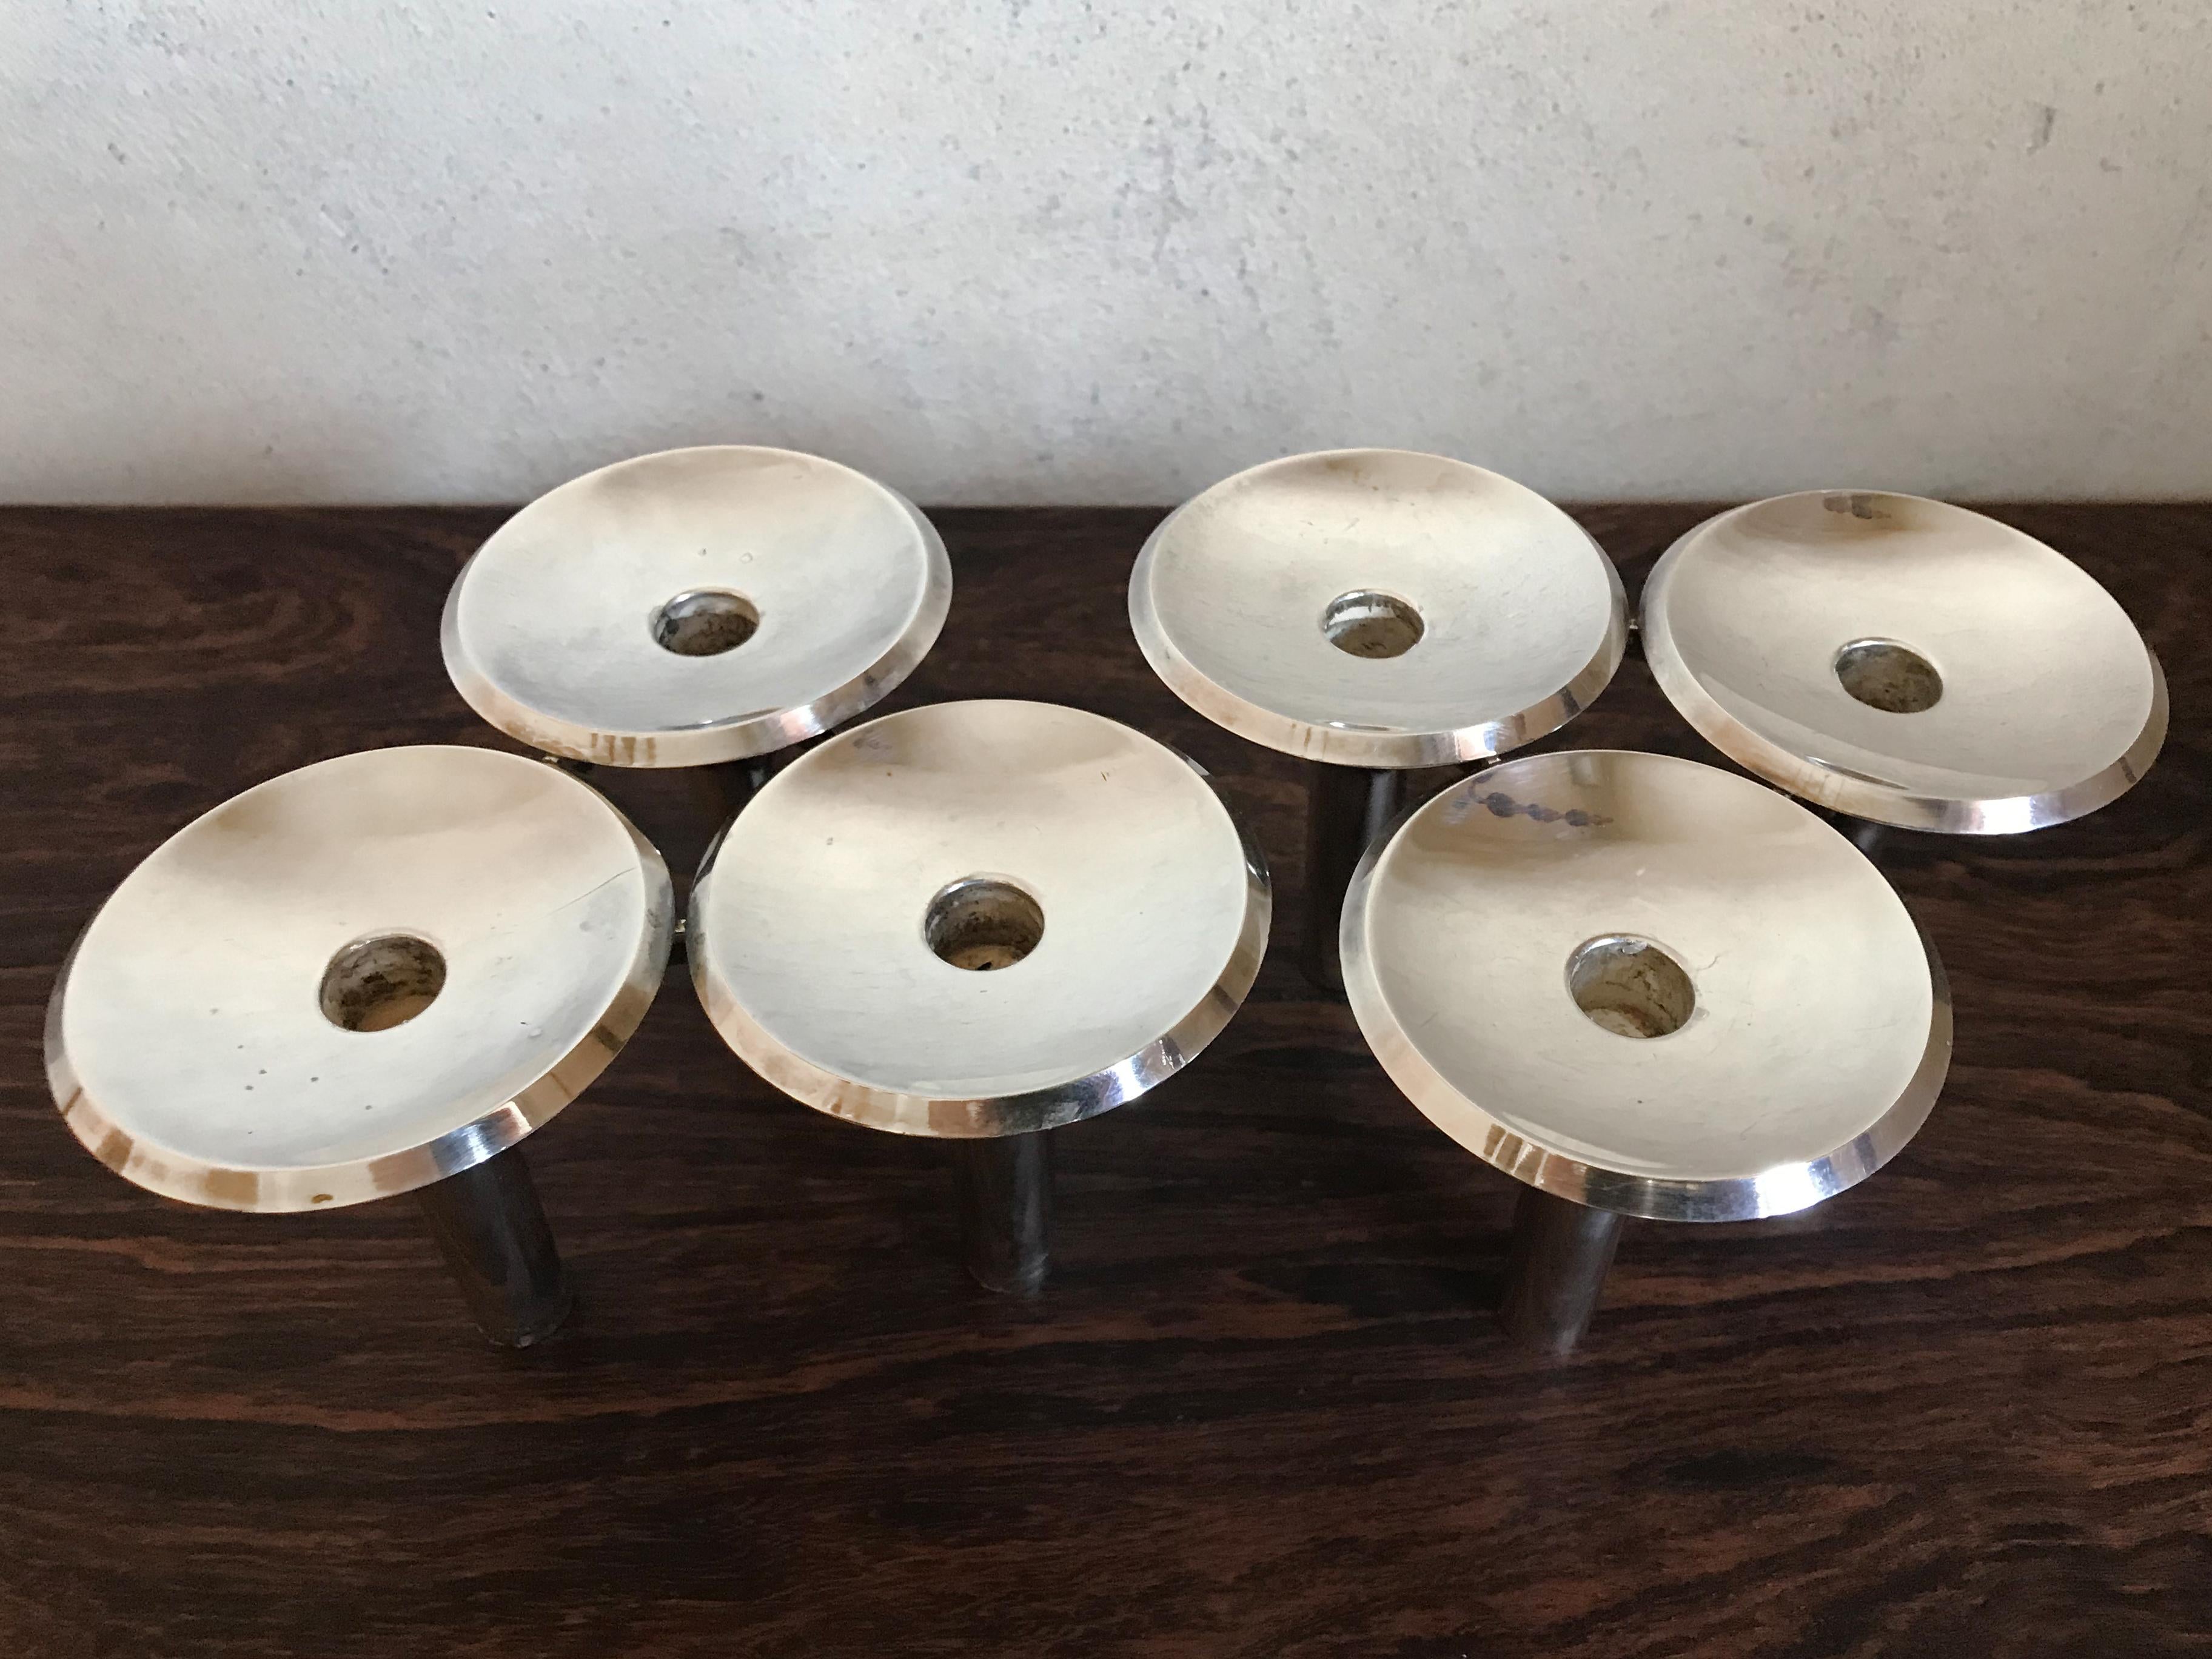 Ceasar Stoffi e Fritz Nagel Candleholders for BMF in Chromed Metal, 1960s For Sale 1